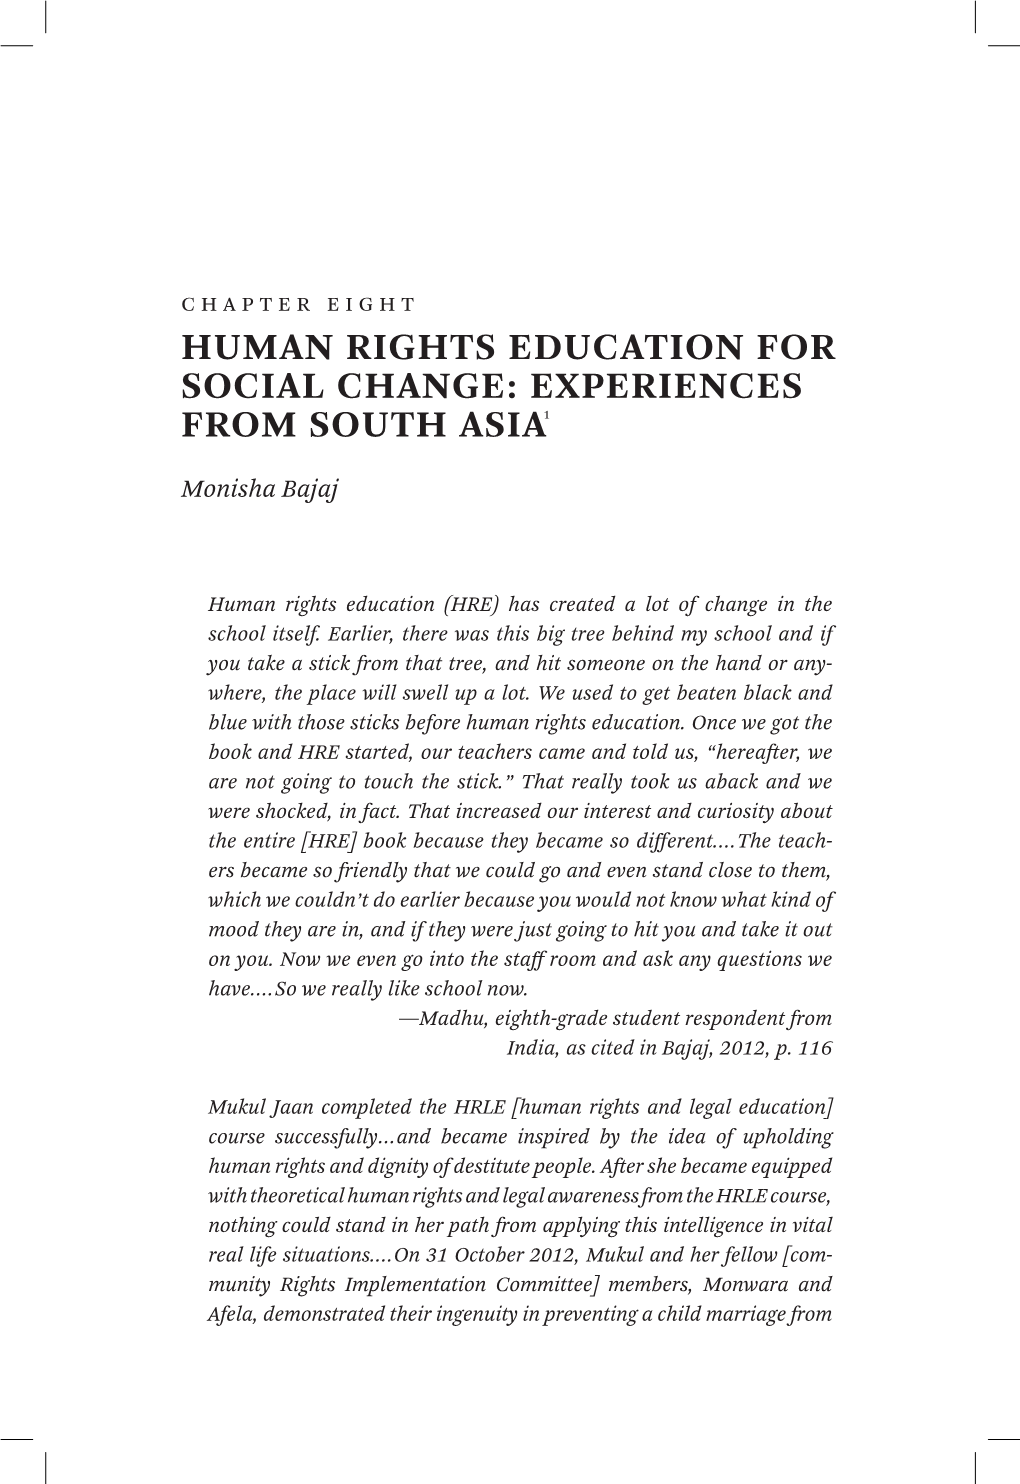 Human Rights Education for Social Change: Experiences from South Asia1